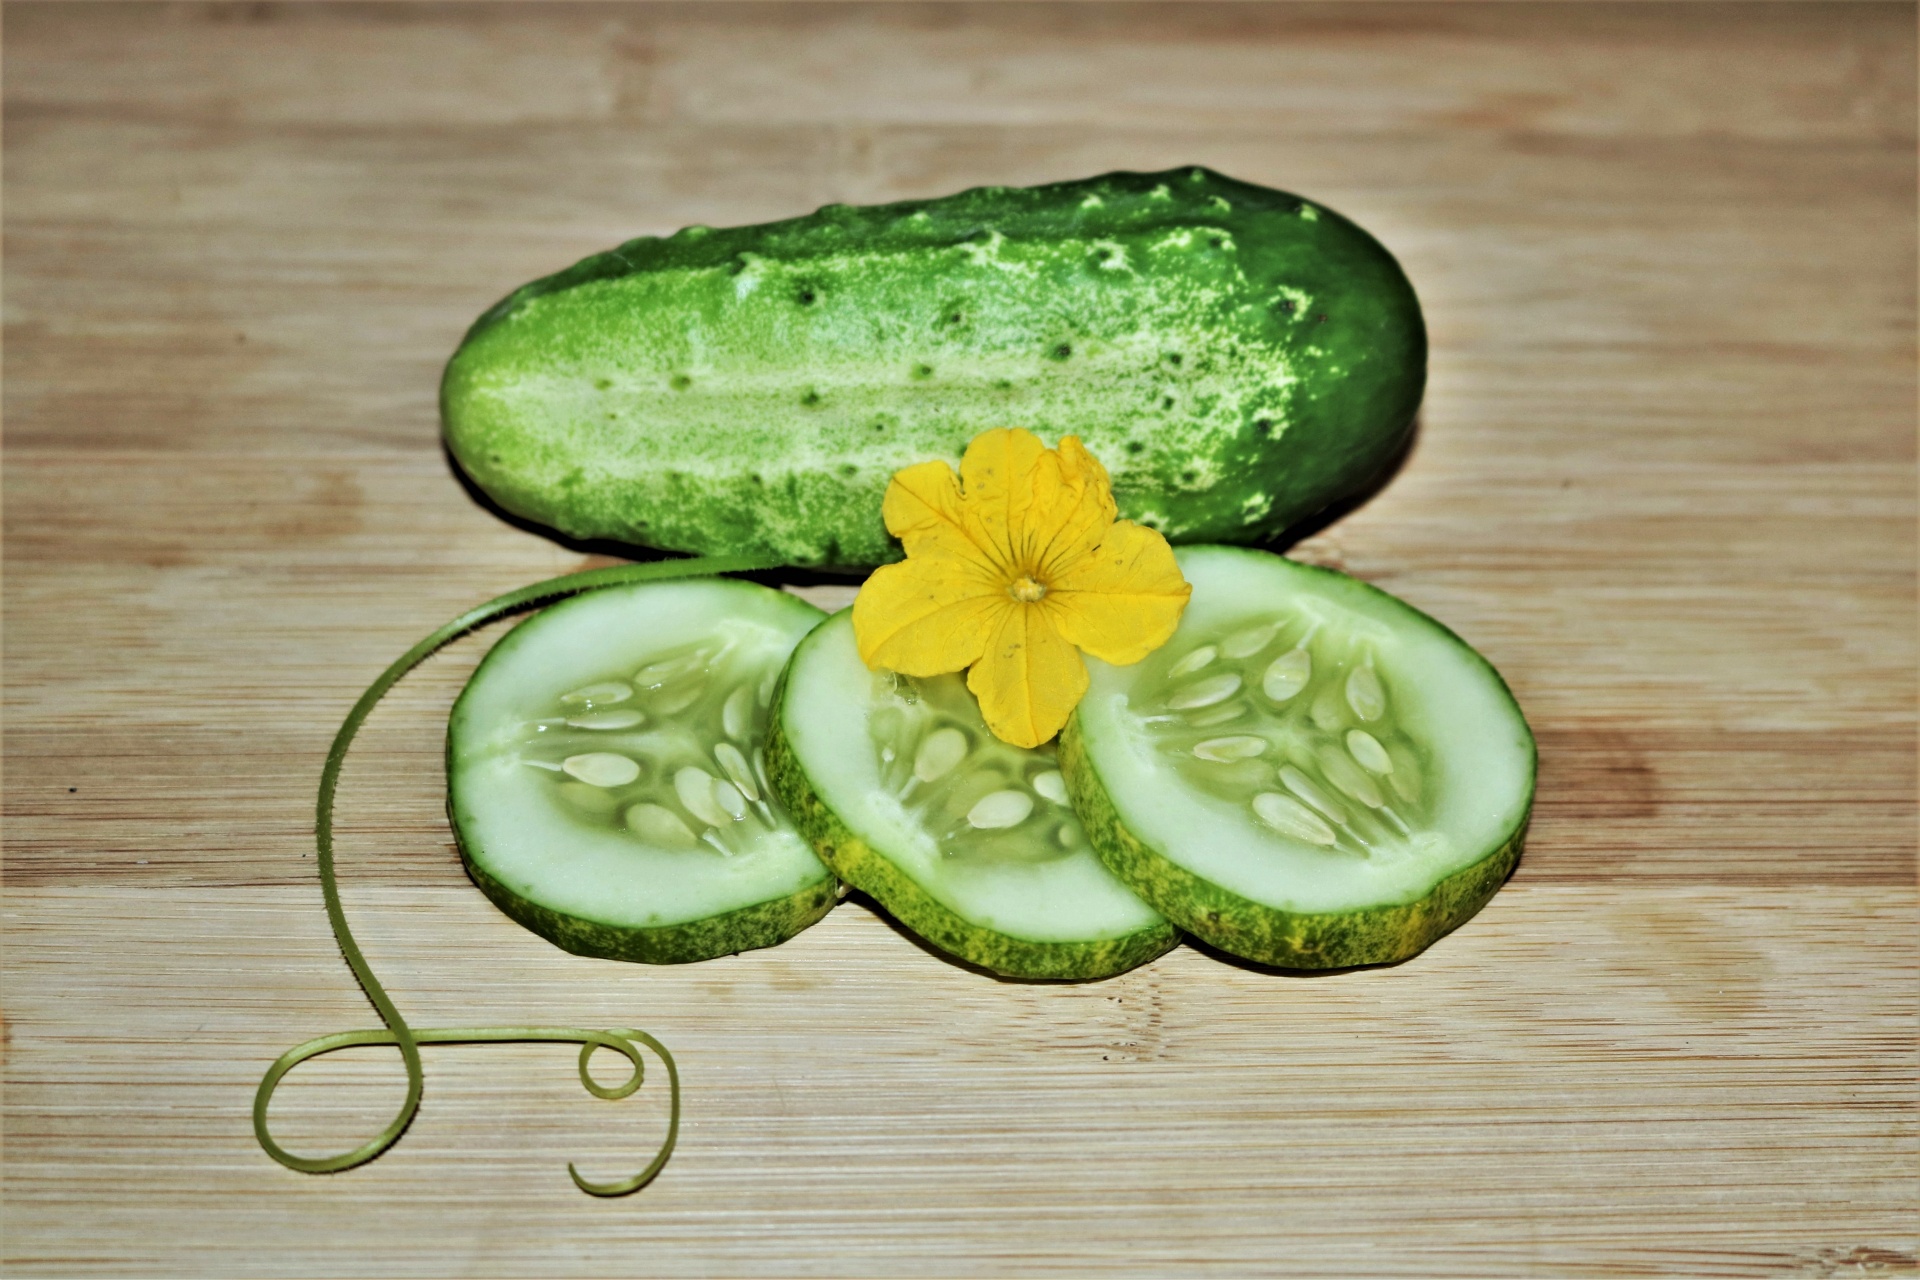 Cucumbers, sliced and whole, on a wood table, with cucumber bloom and tendril.